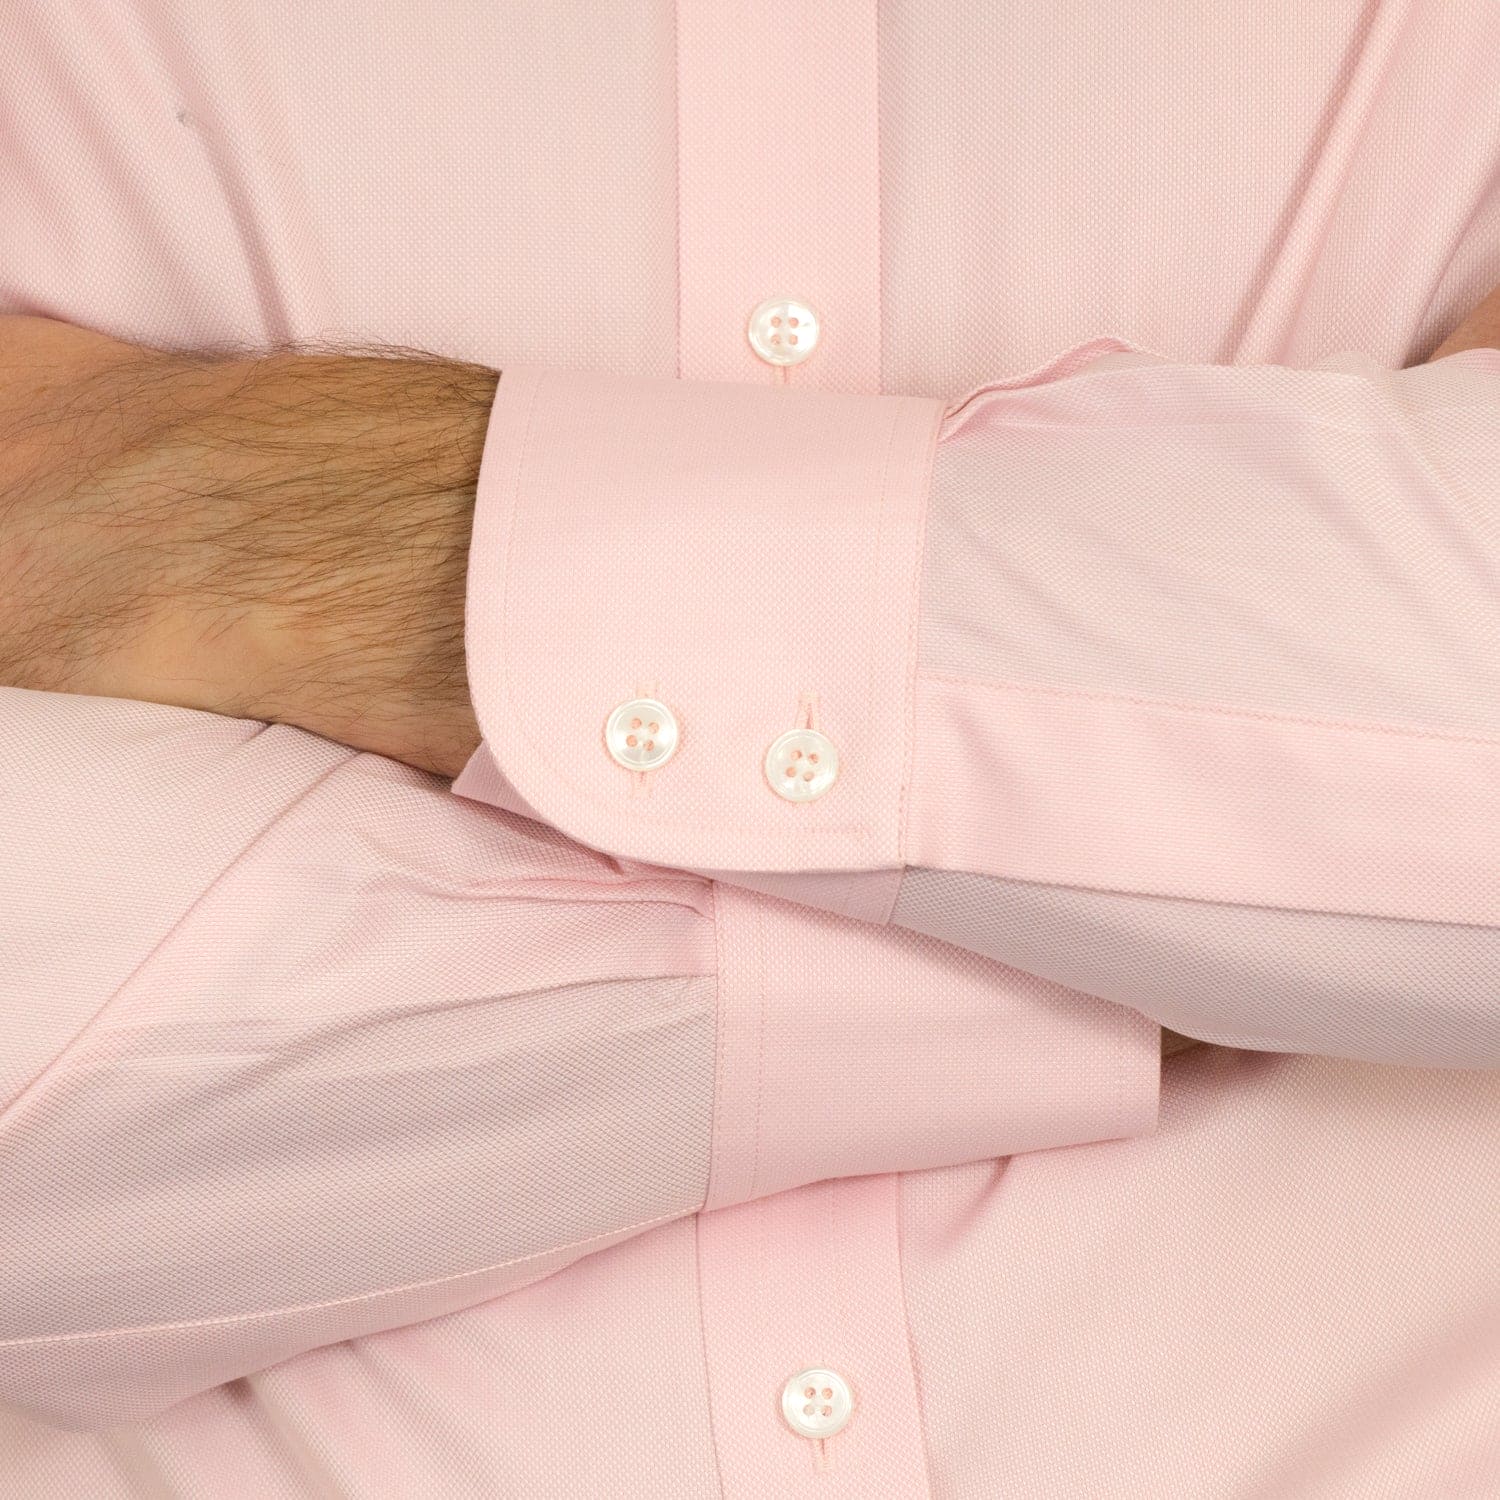 Two Button Cuff Pink Oxford